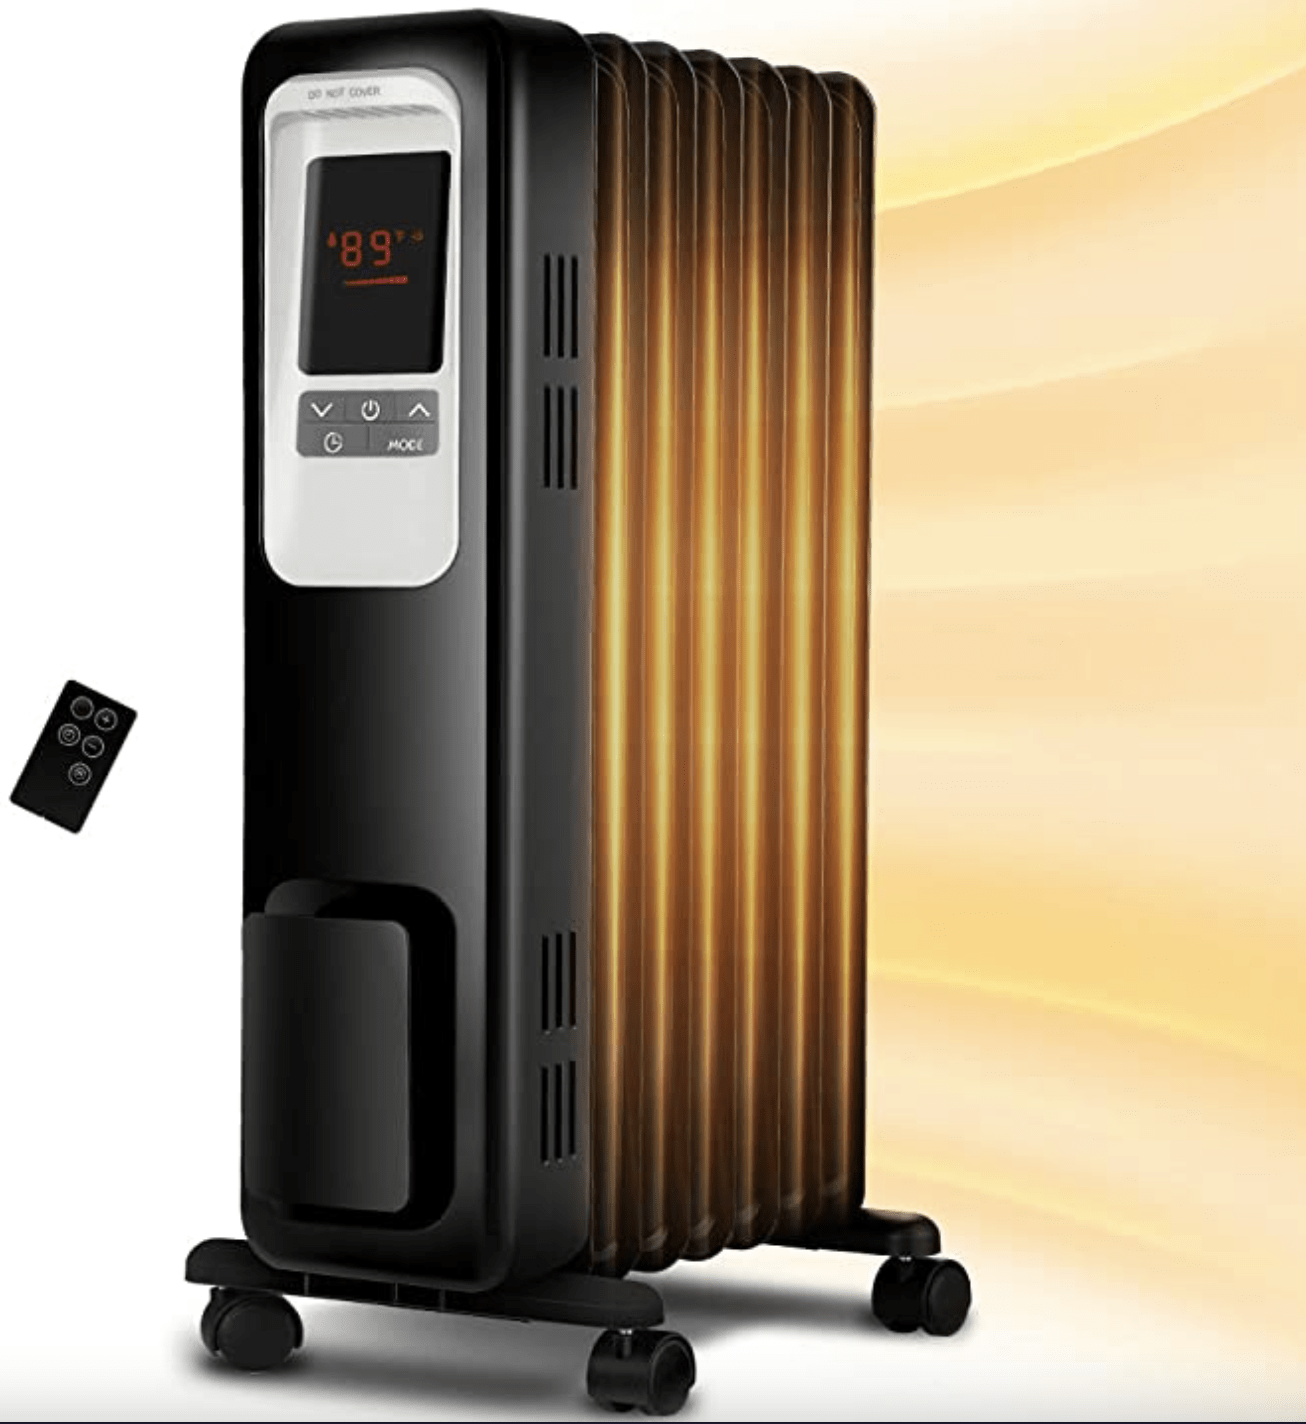 tense Cellar Essentially 10 best space heaters of 2022, according to experts